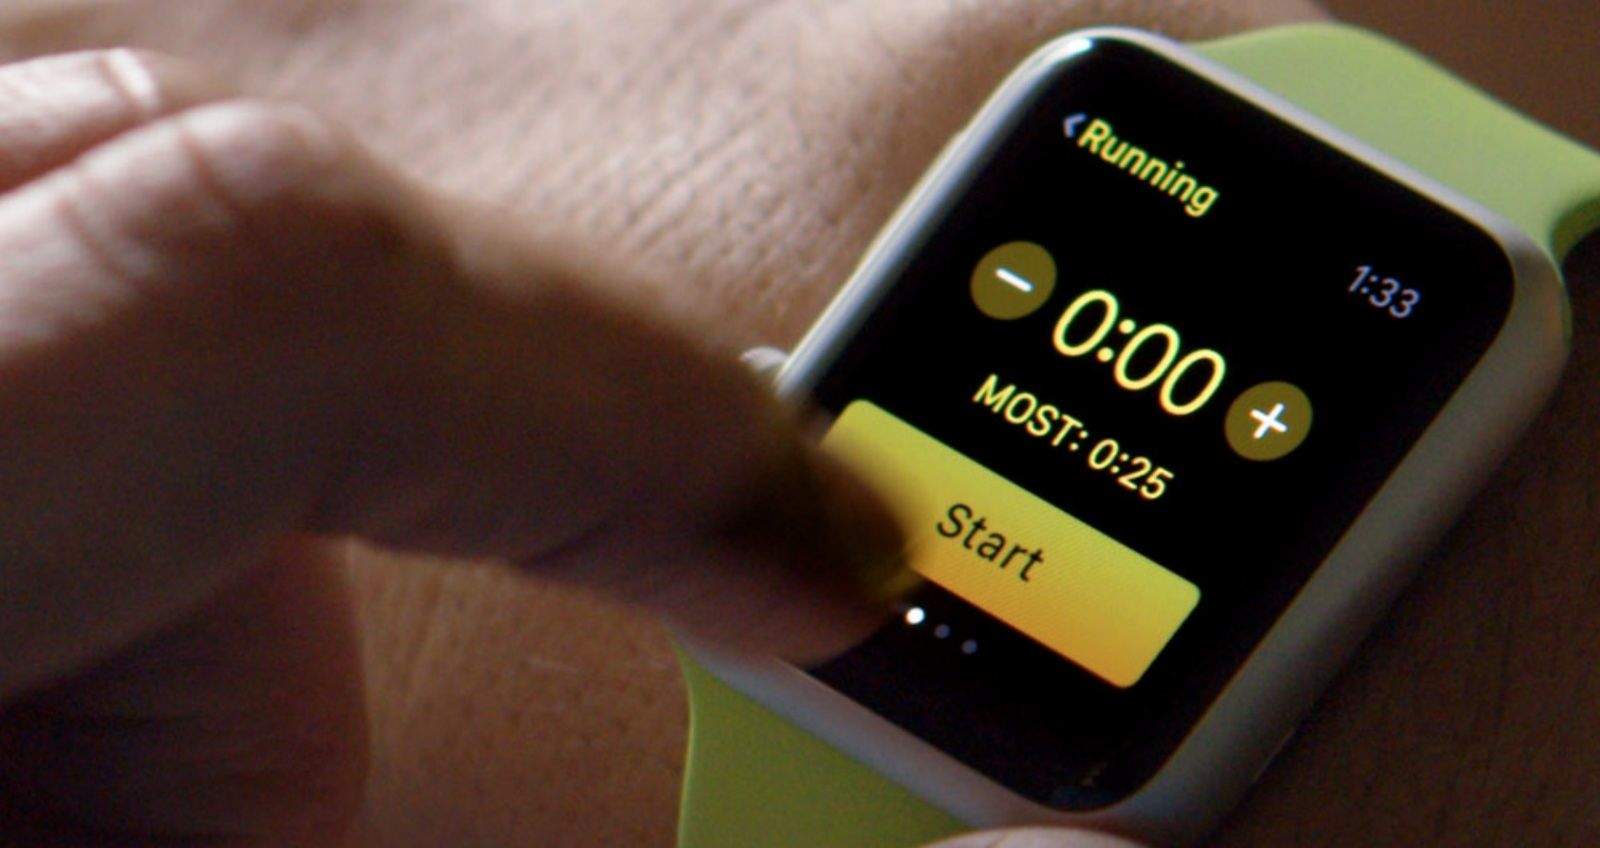 A beginner's guide to running with the Apple Watch